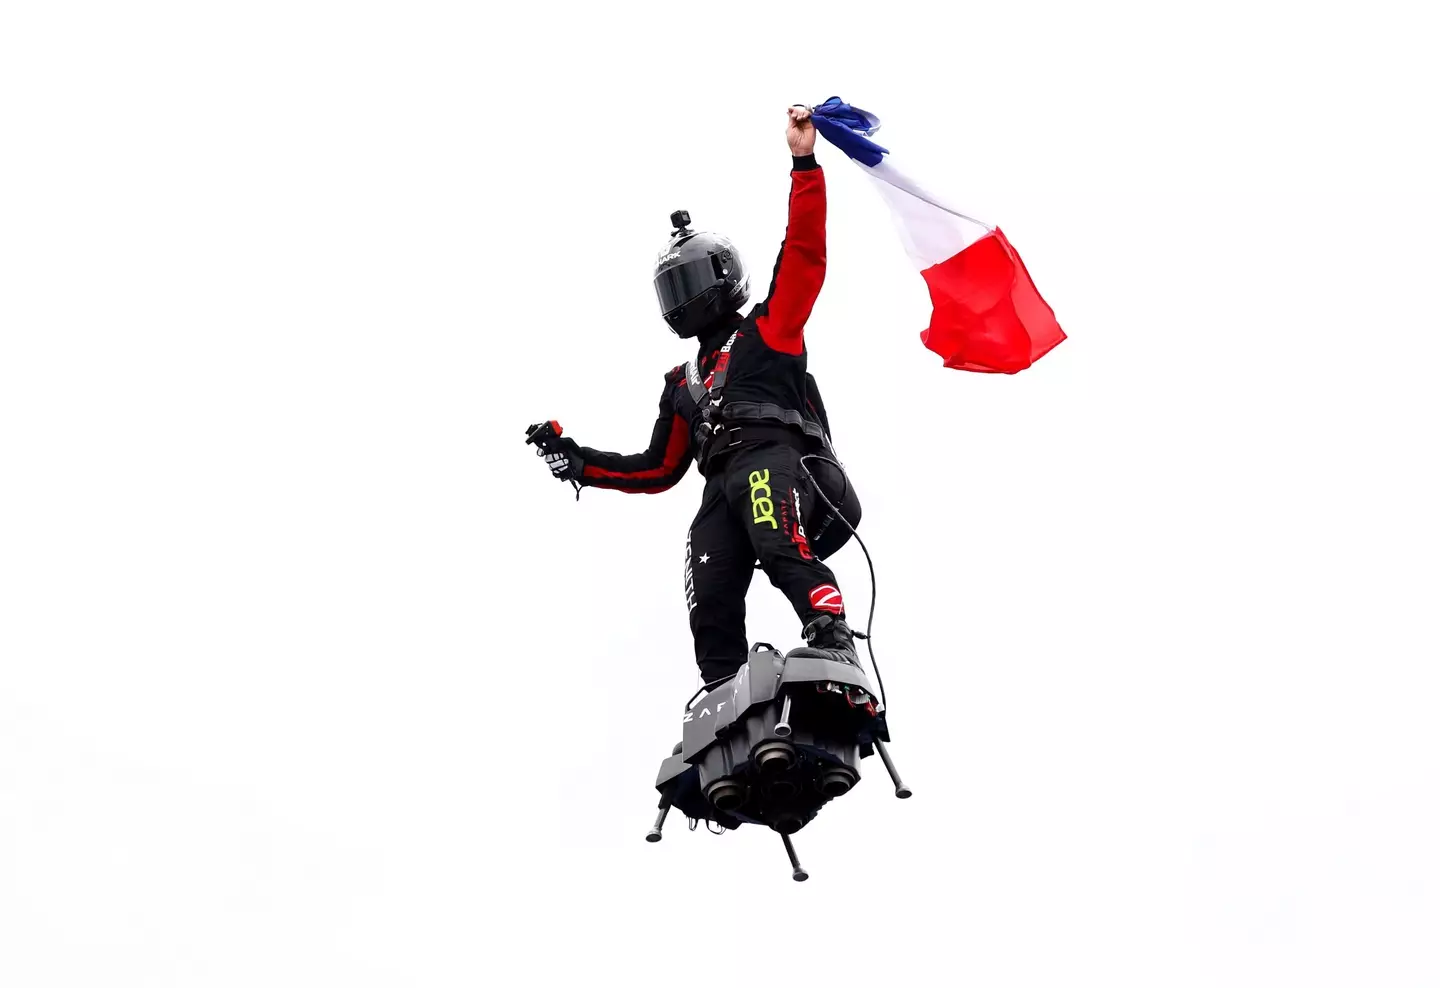 Franky Zapata developed the flyboard himself.